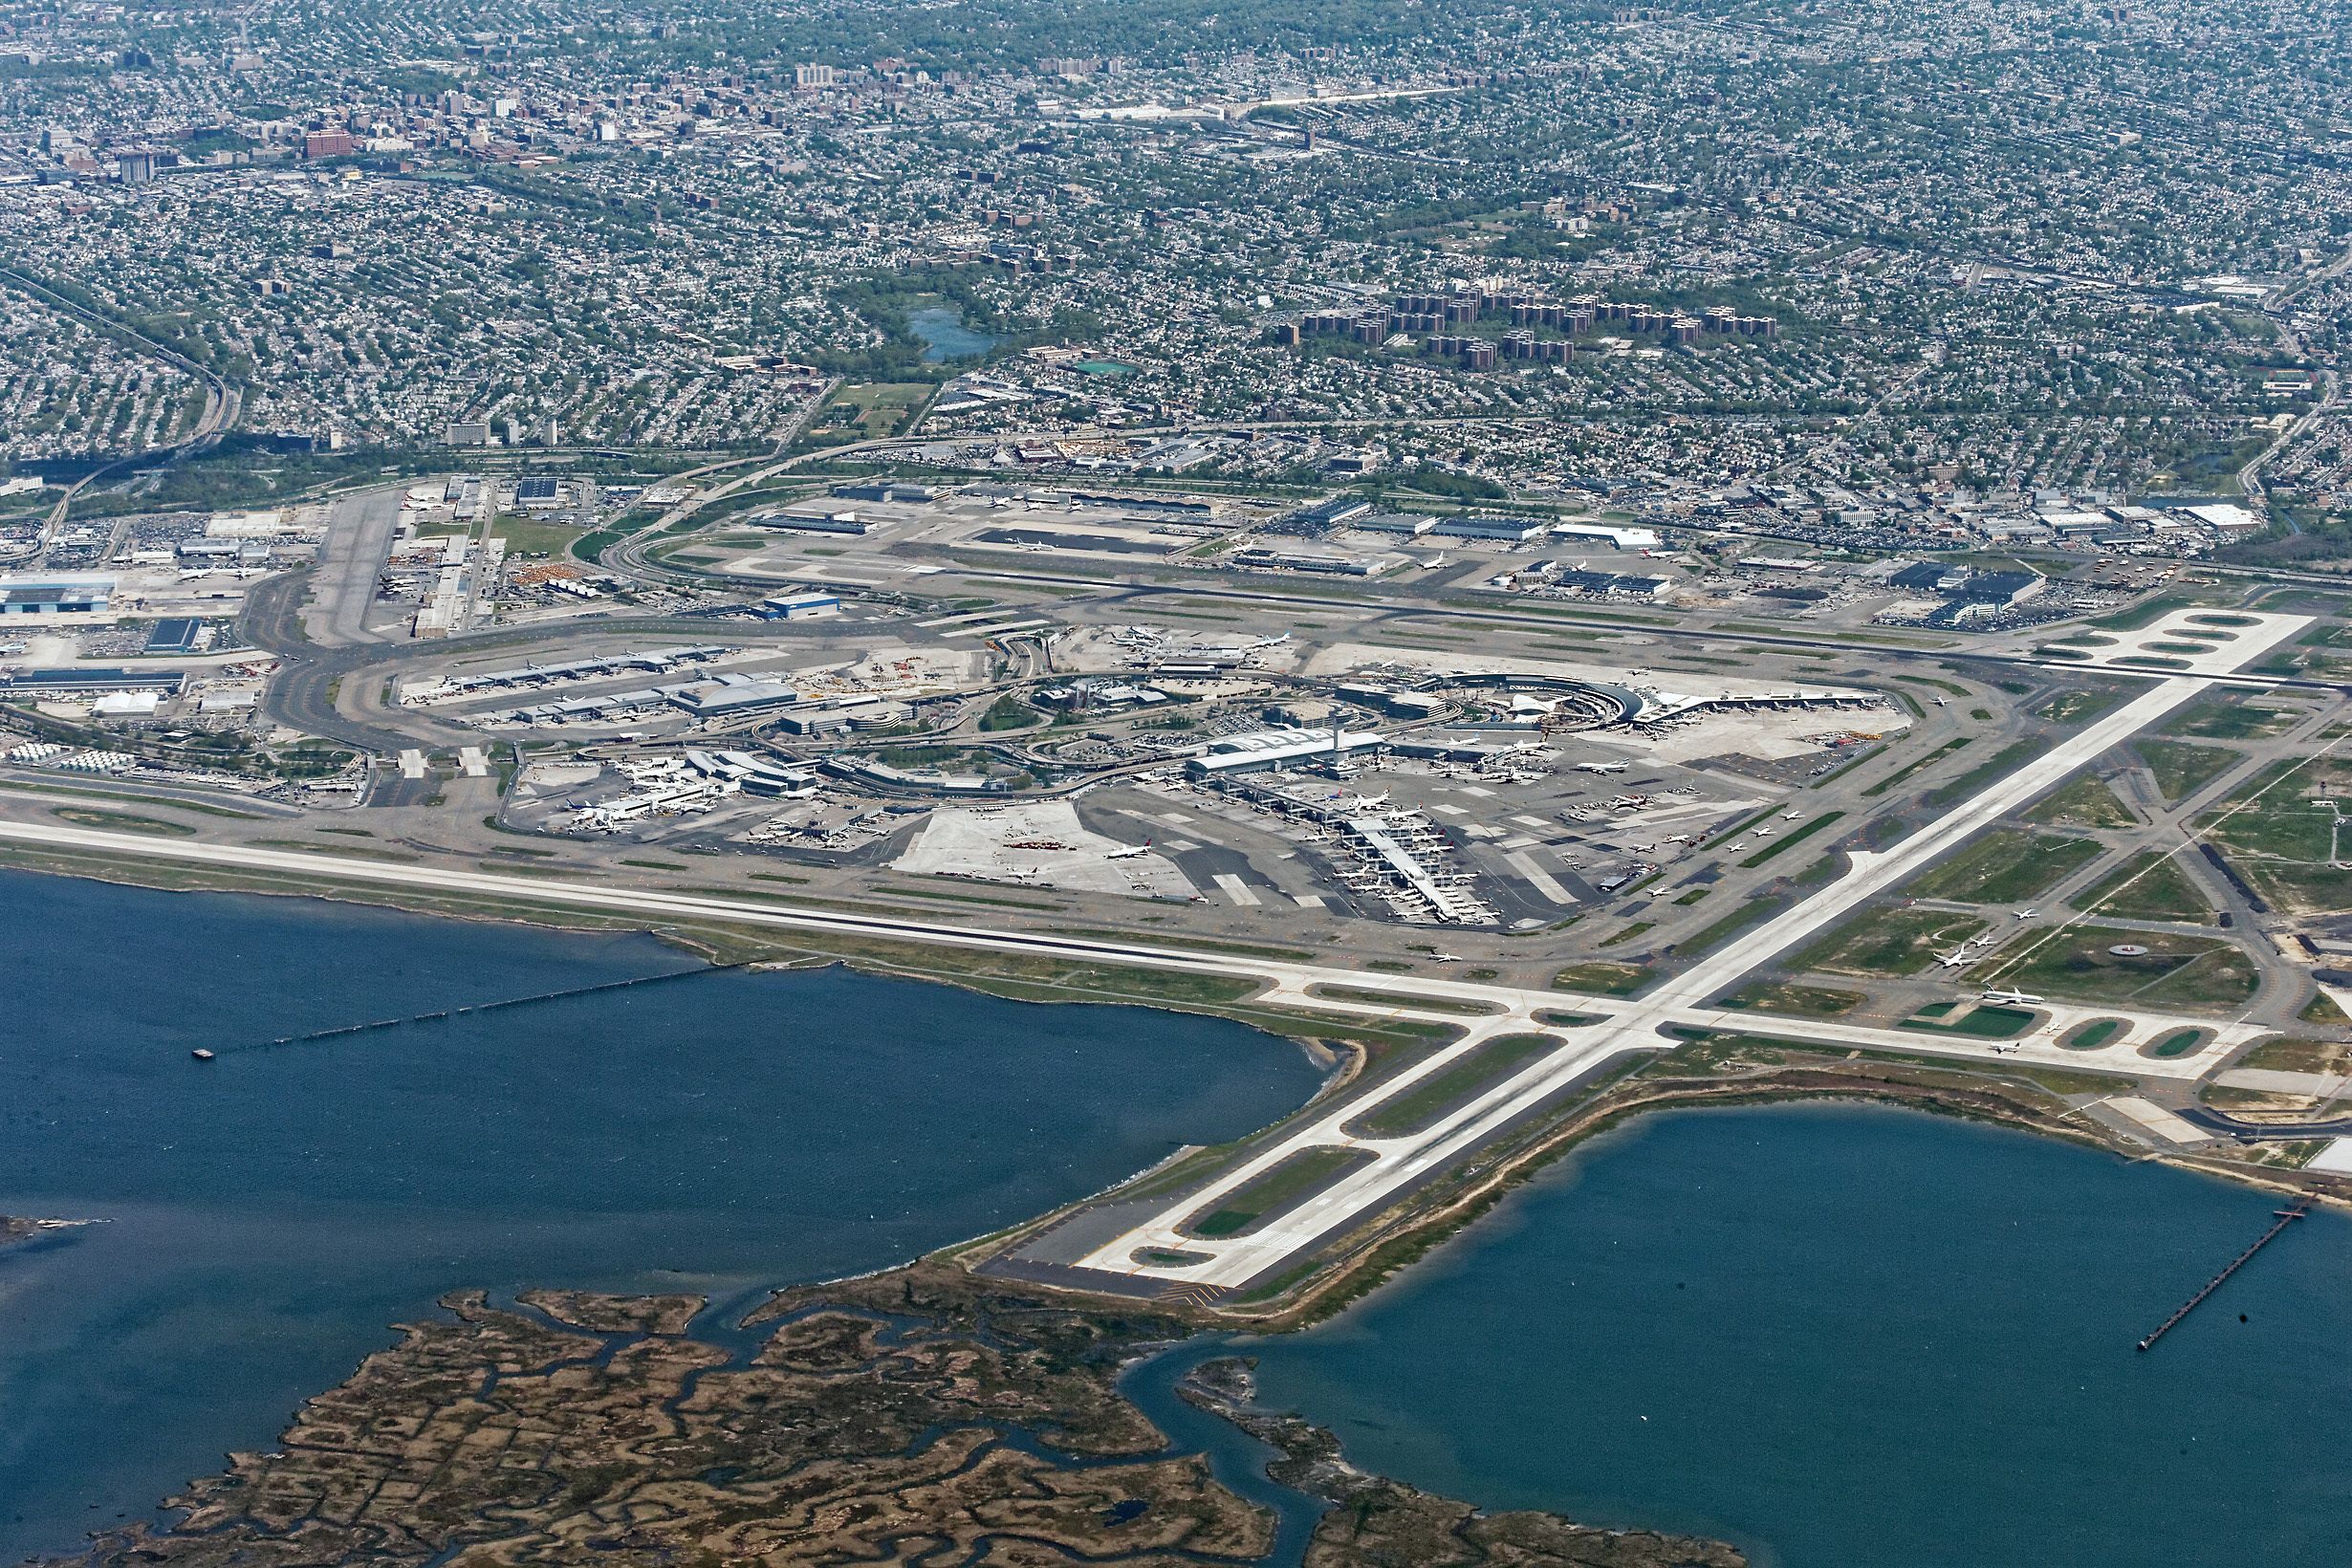 An Aerial view of New York JFK Airport.